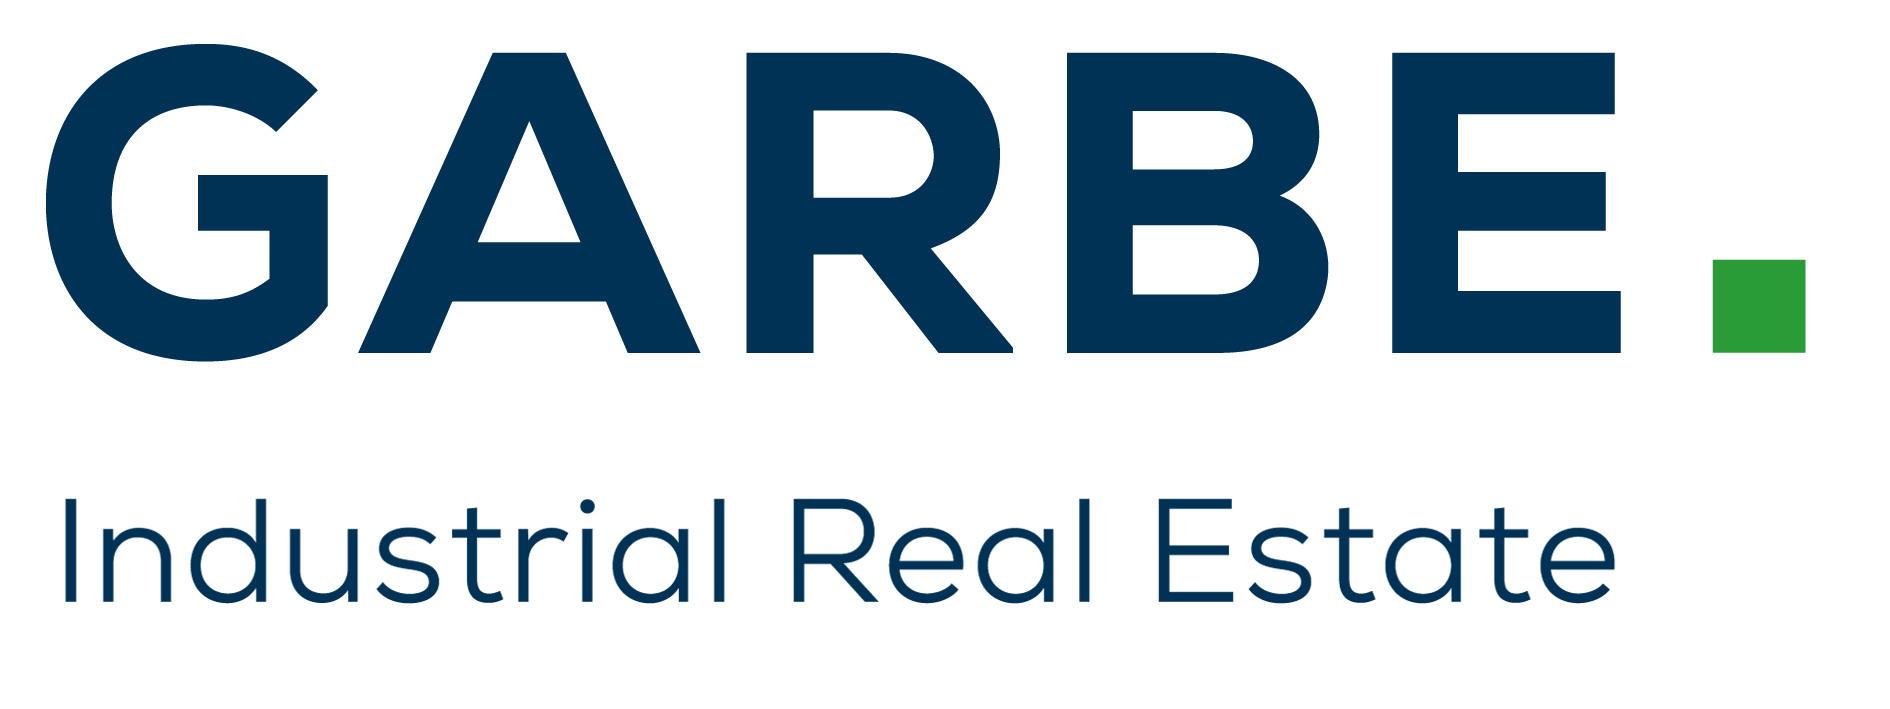 GARBE Industrial Real Estate GmbH